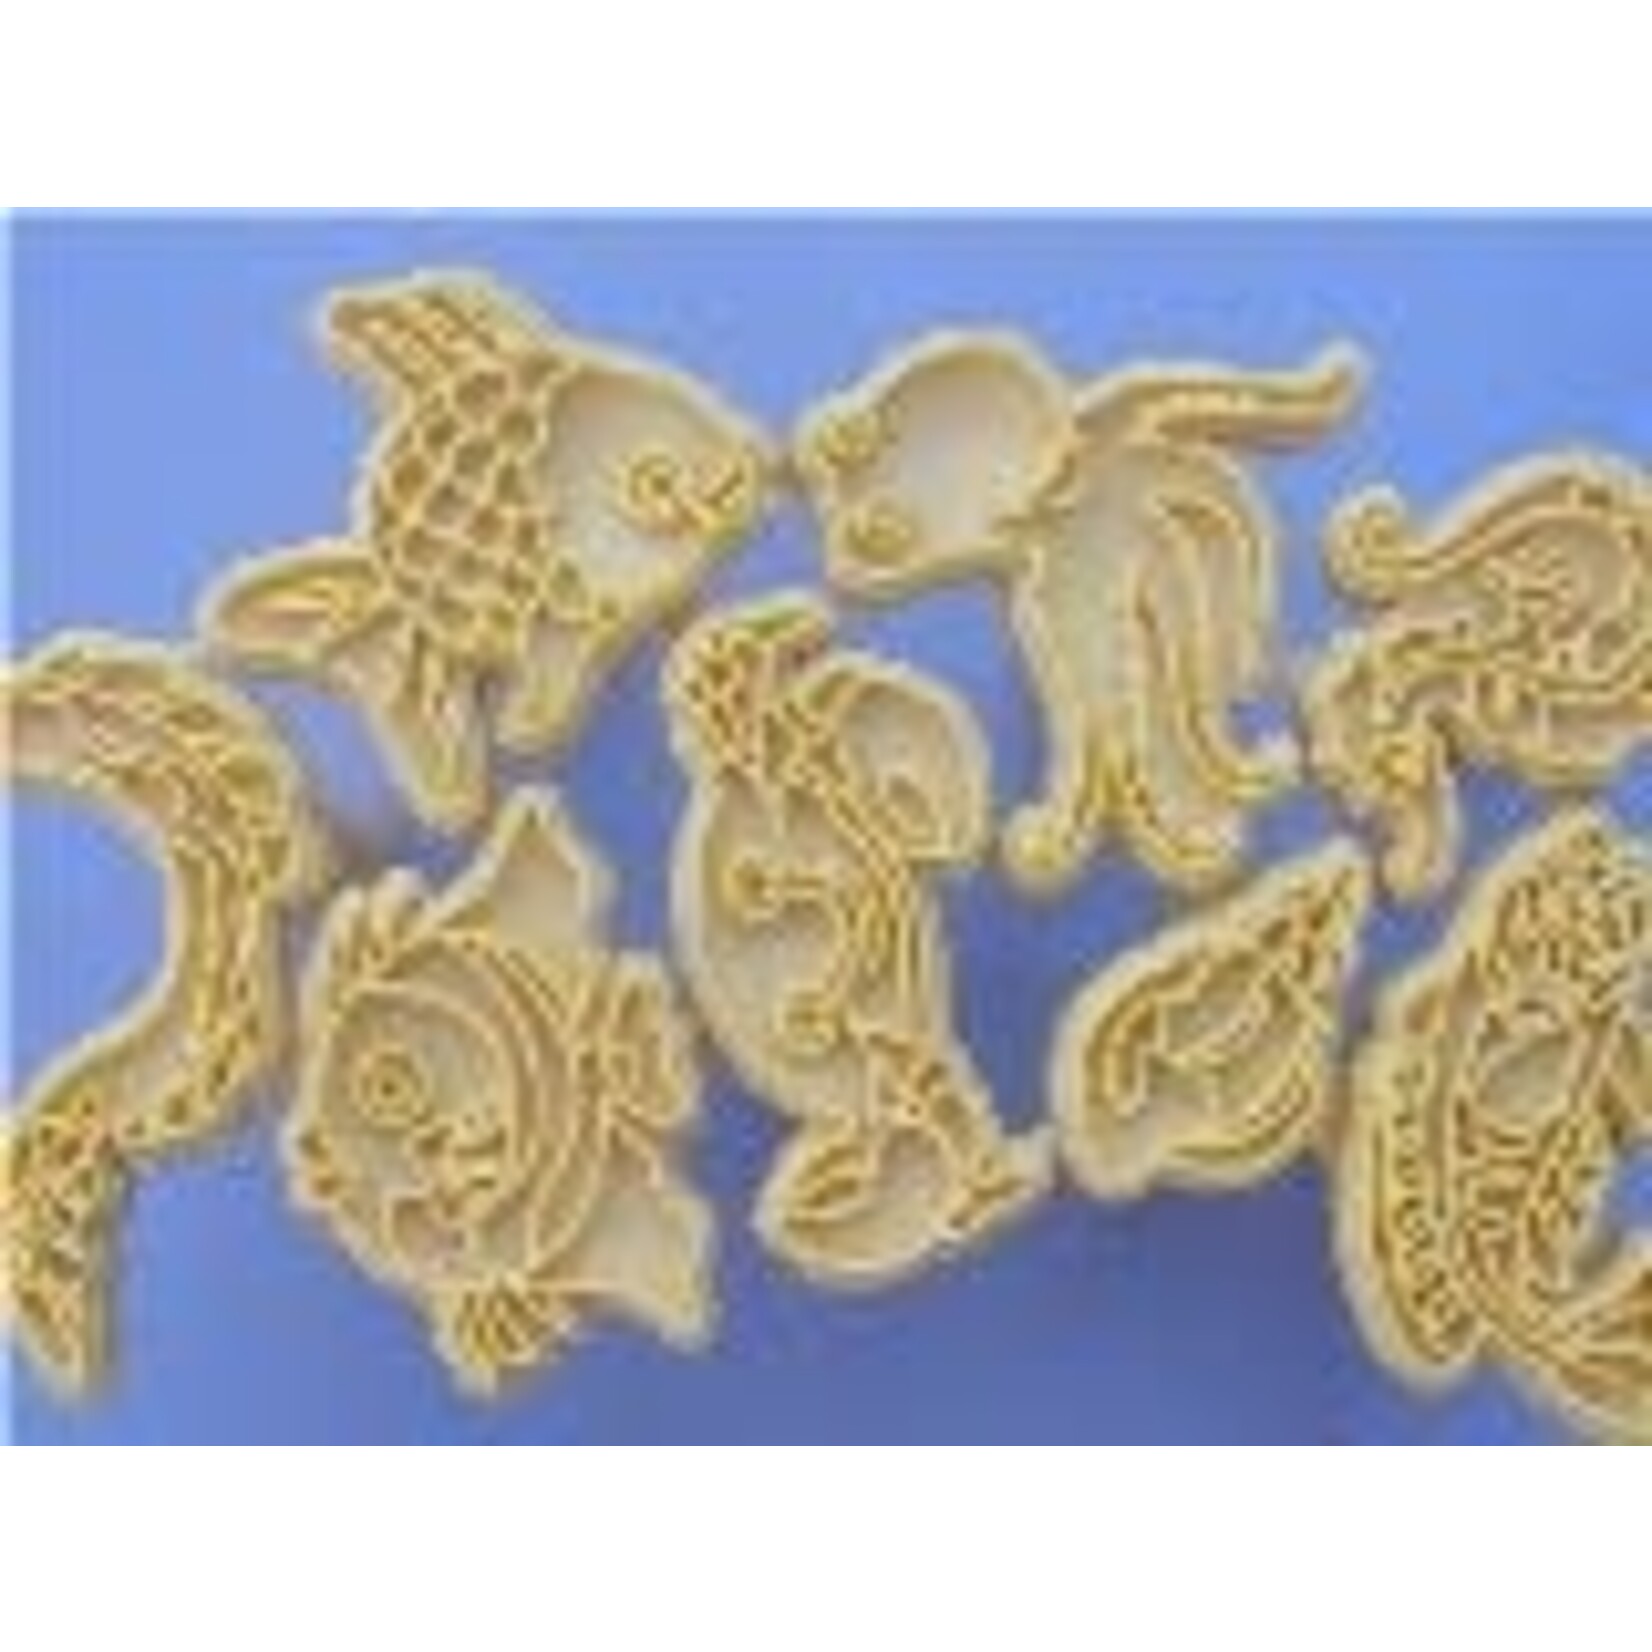 Chinese Clay Art STAMPS (PLASTIC) - OCEAN LIFE